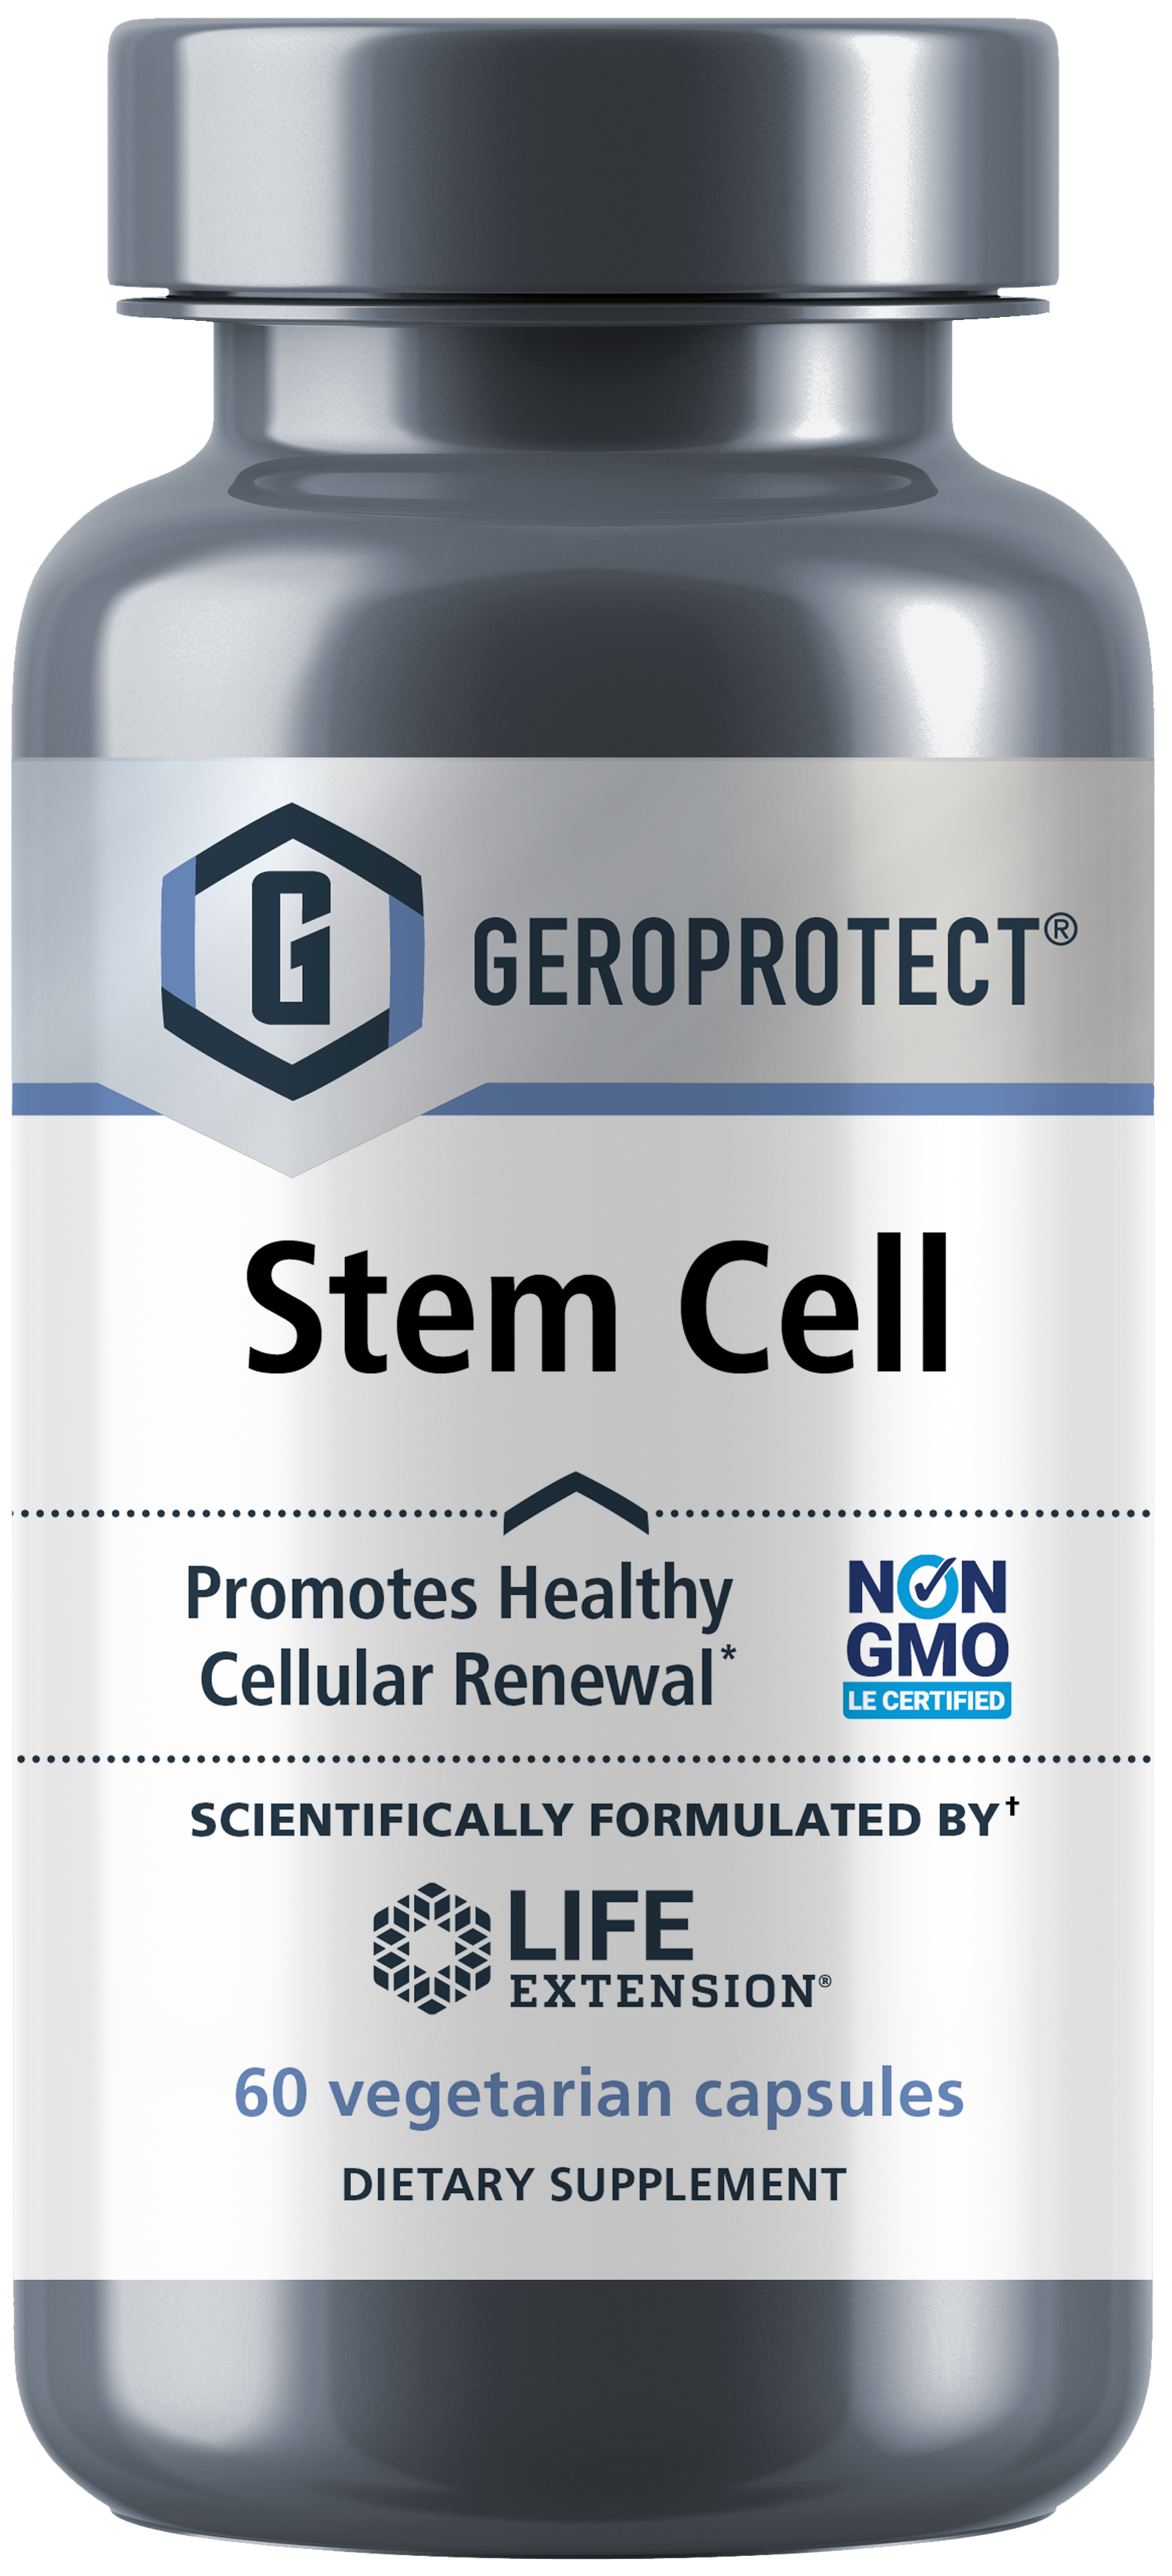 GEROPROTECT Stem Cell from Life Extension promotes healthy cellular renewal. 